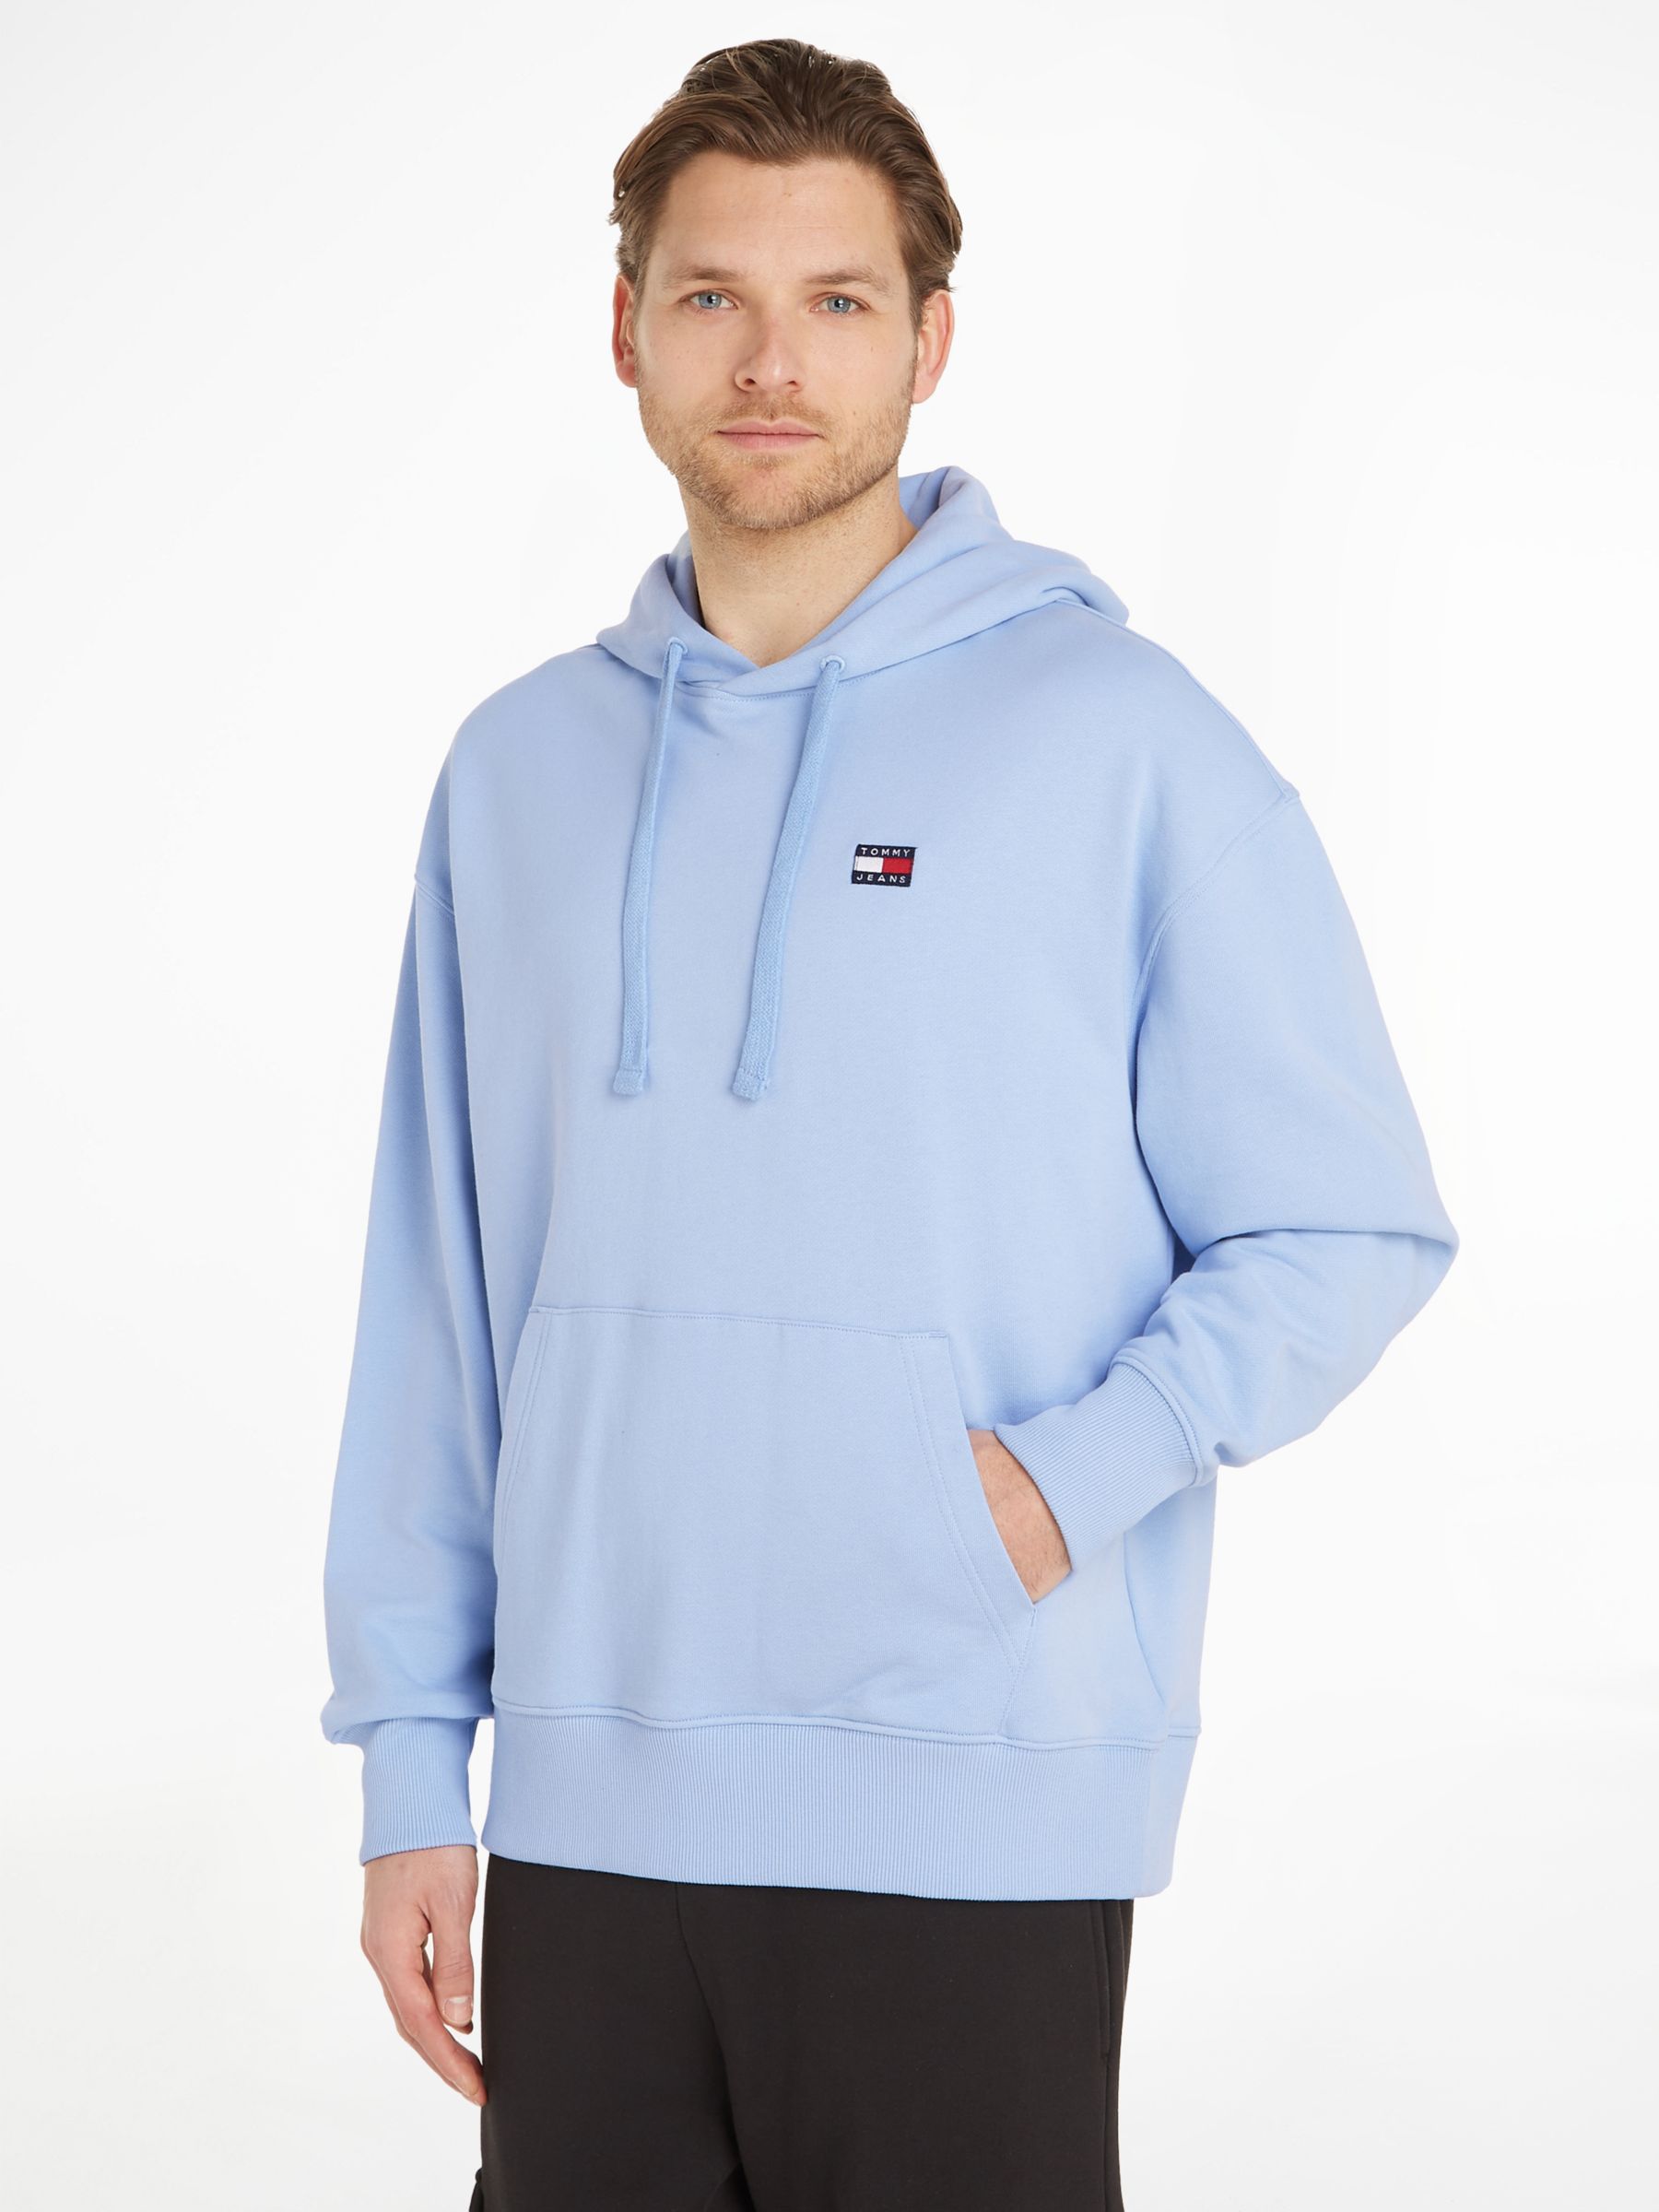 Tommy Hilfiger Badge Hoodie, Chambray Blue at John Lewis & Partners